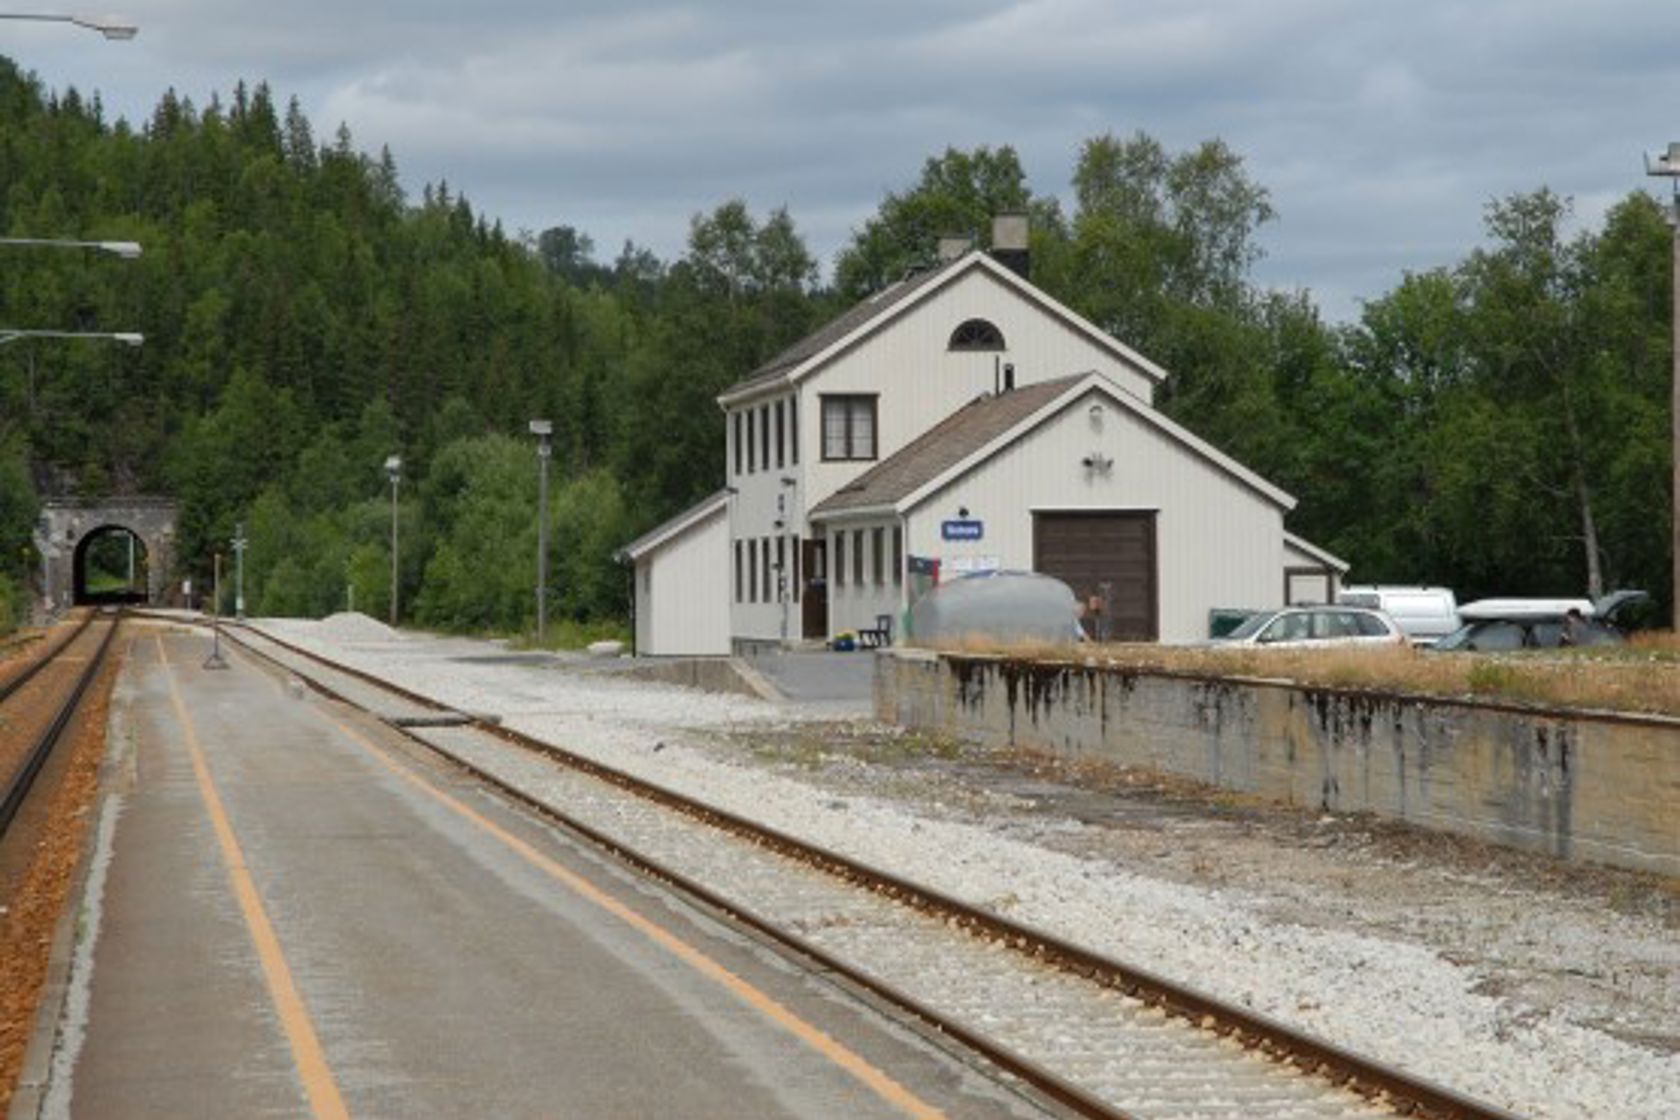 Exterior view of Trofors station